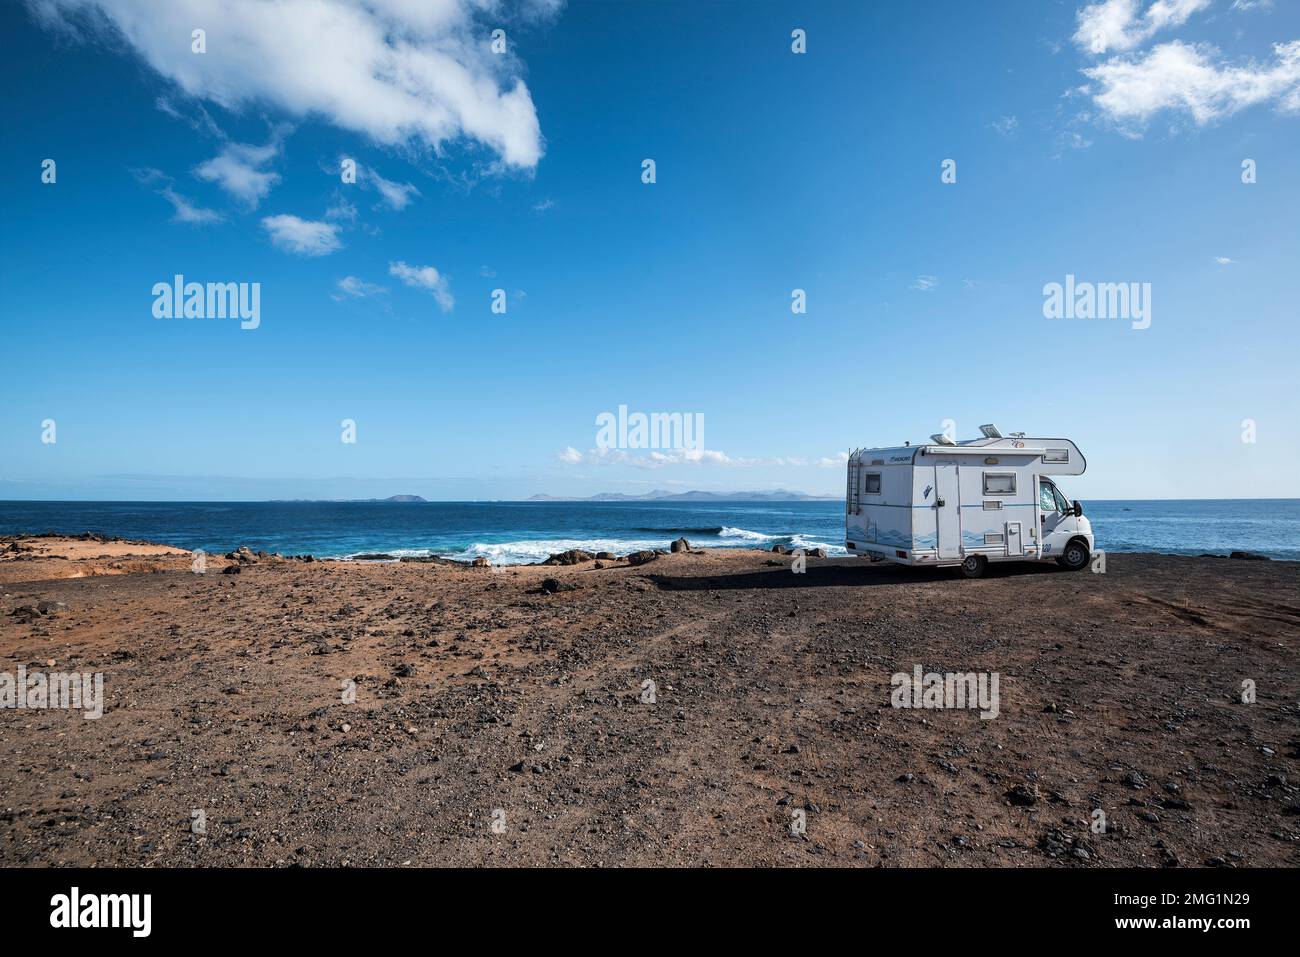 Campervan, motorhome parked at remote location on beach overlooking Ocean. Stock Photo